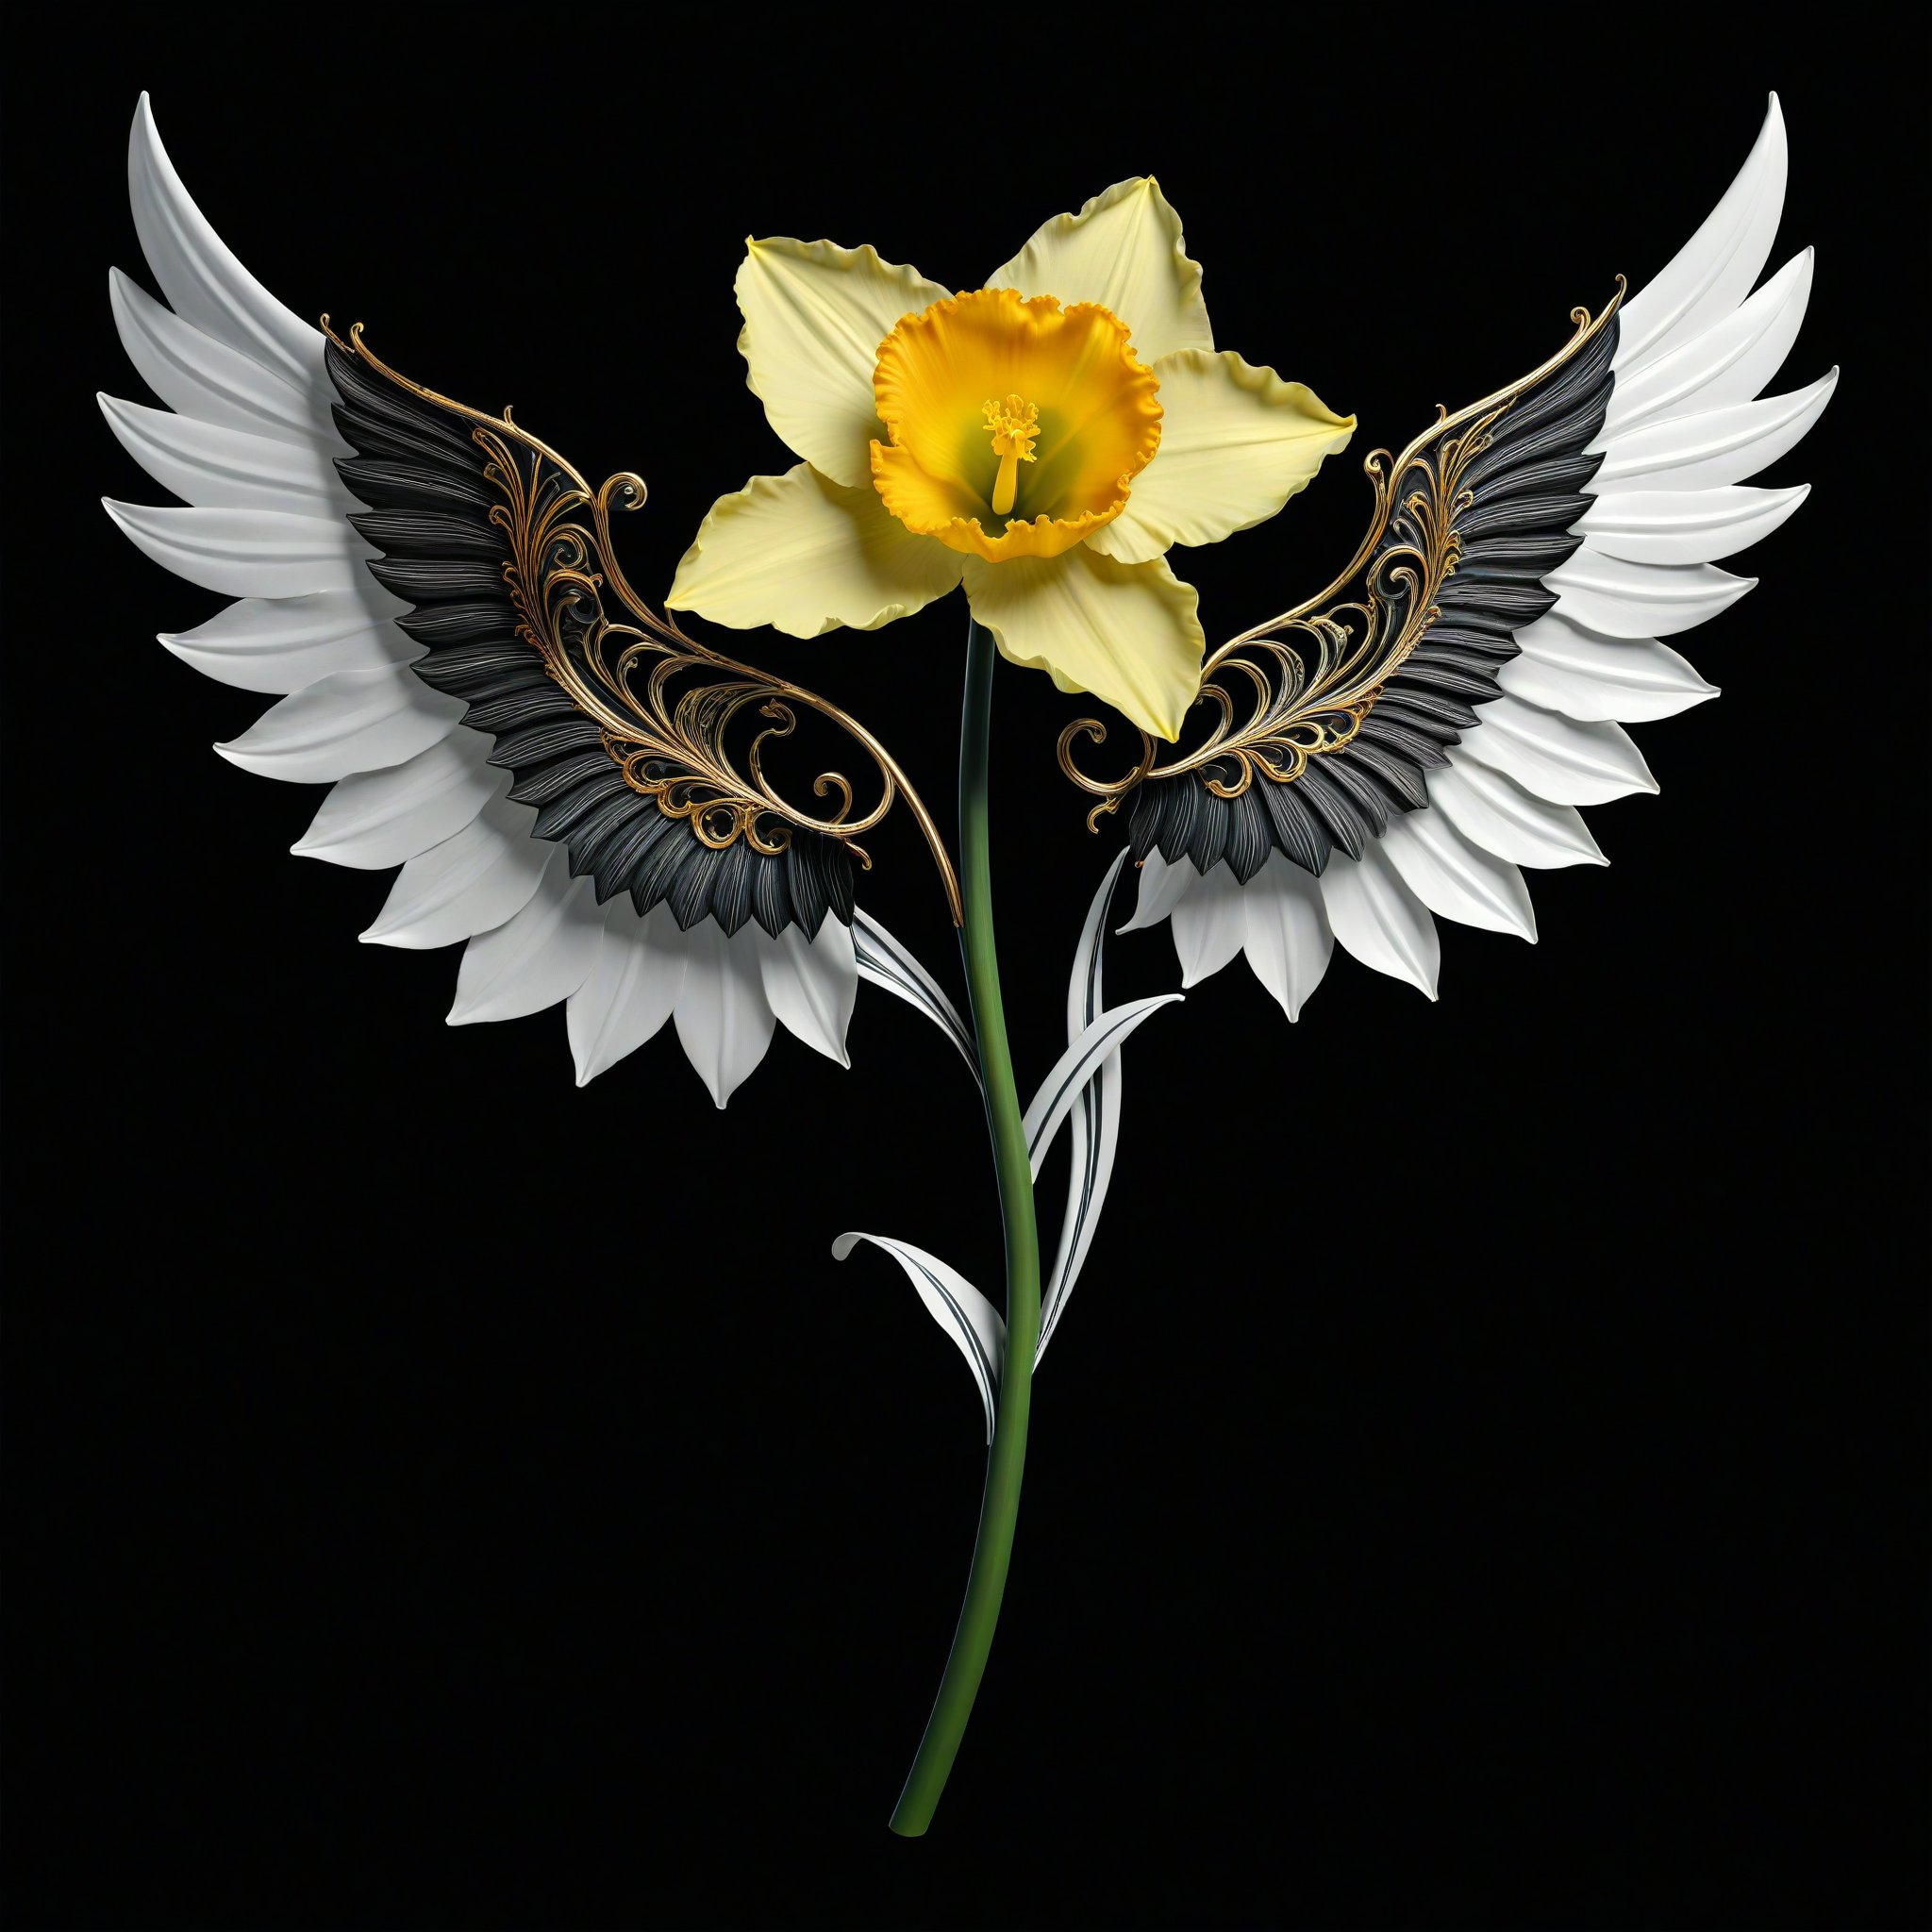 a daffodil flower whit wing majestic with clasic ornament Mechanical lines Elegance T-shirt design, BLACK BACKGROUND